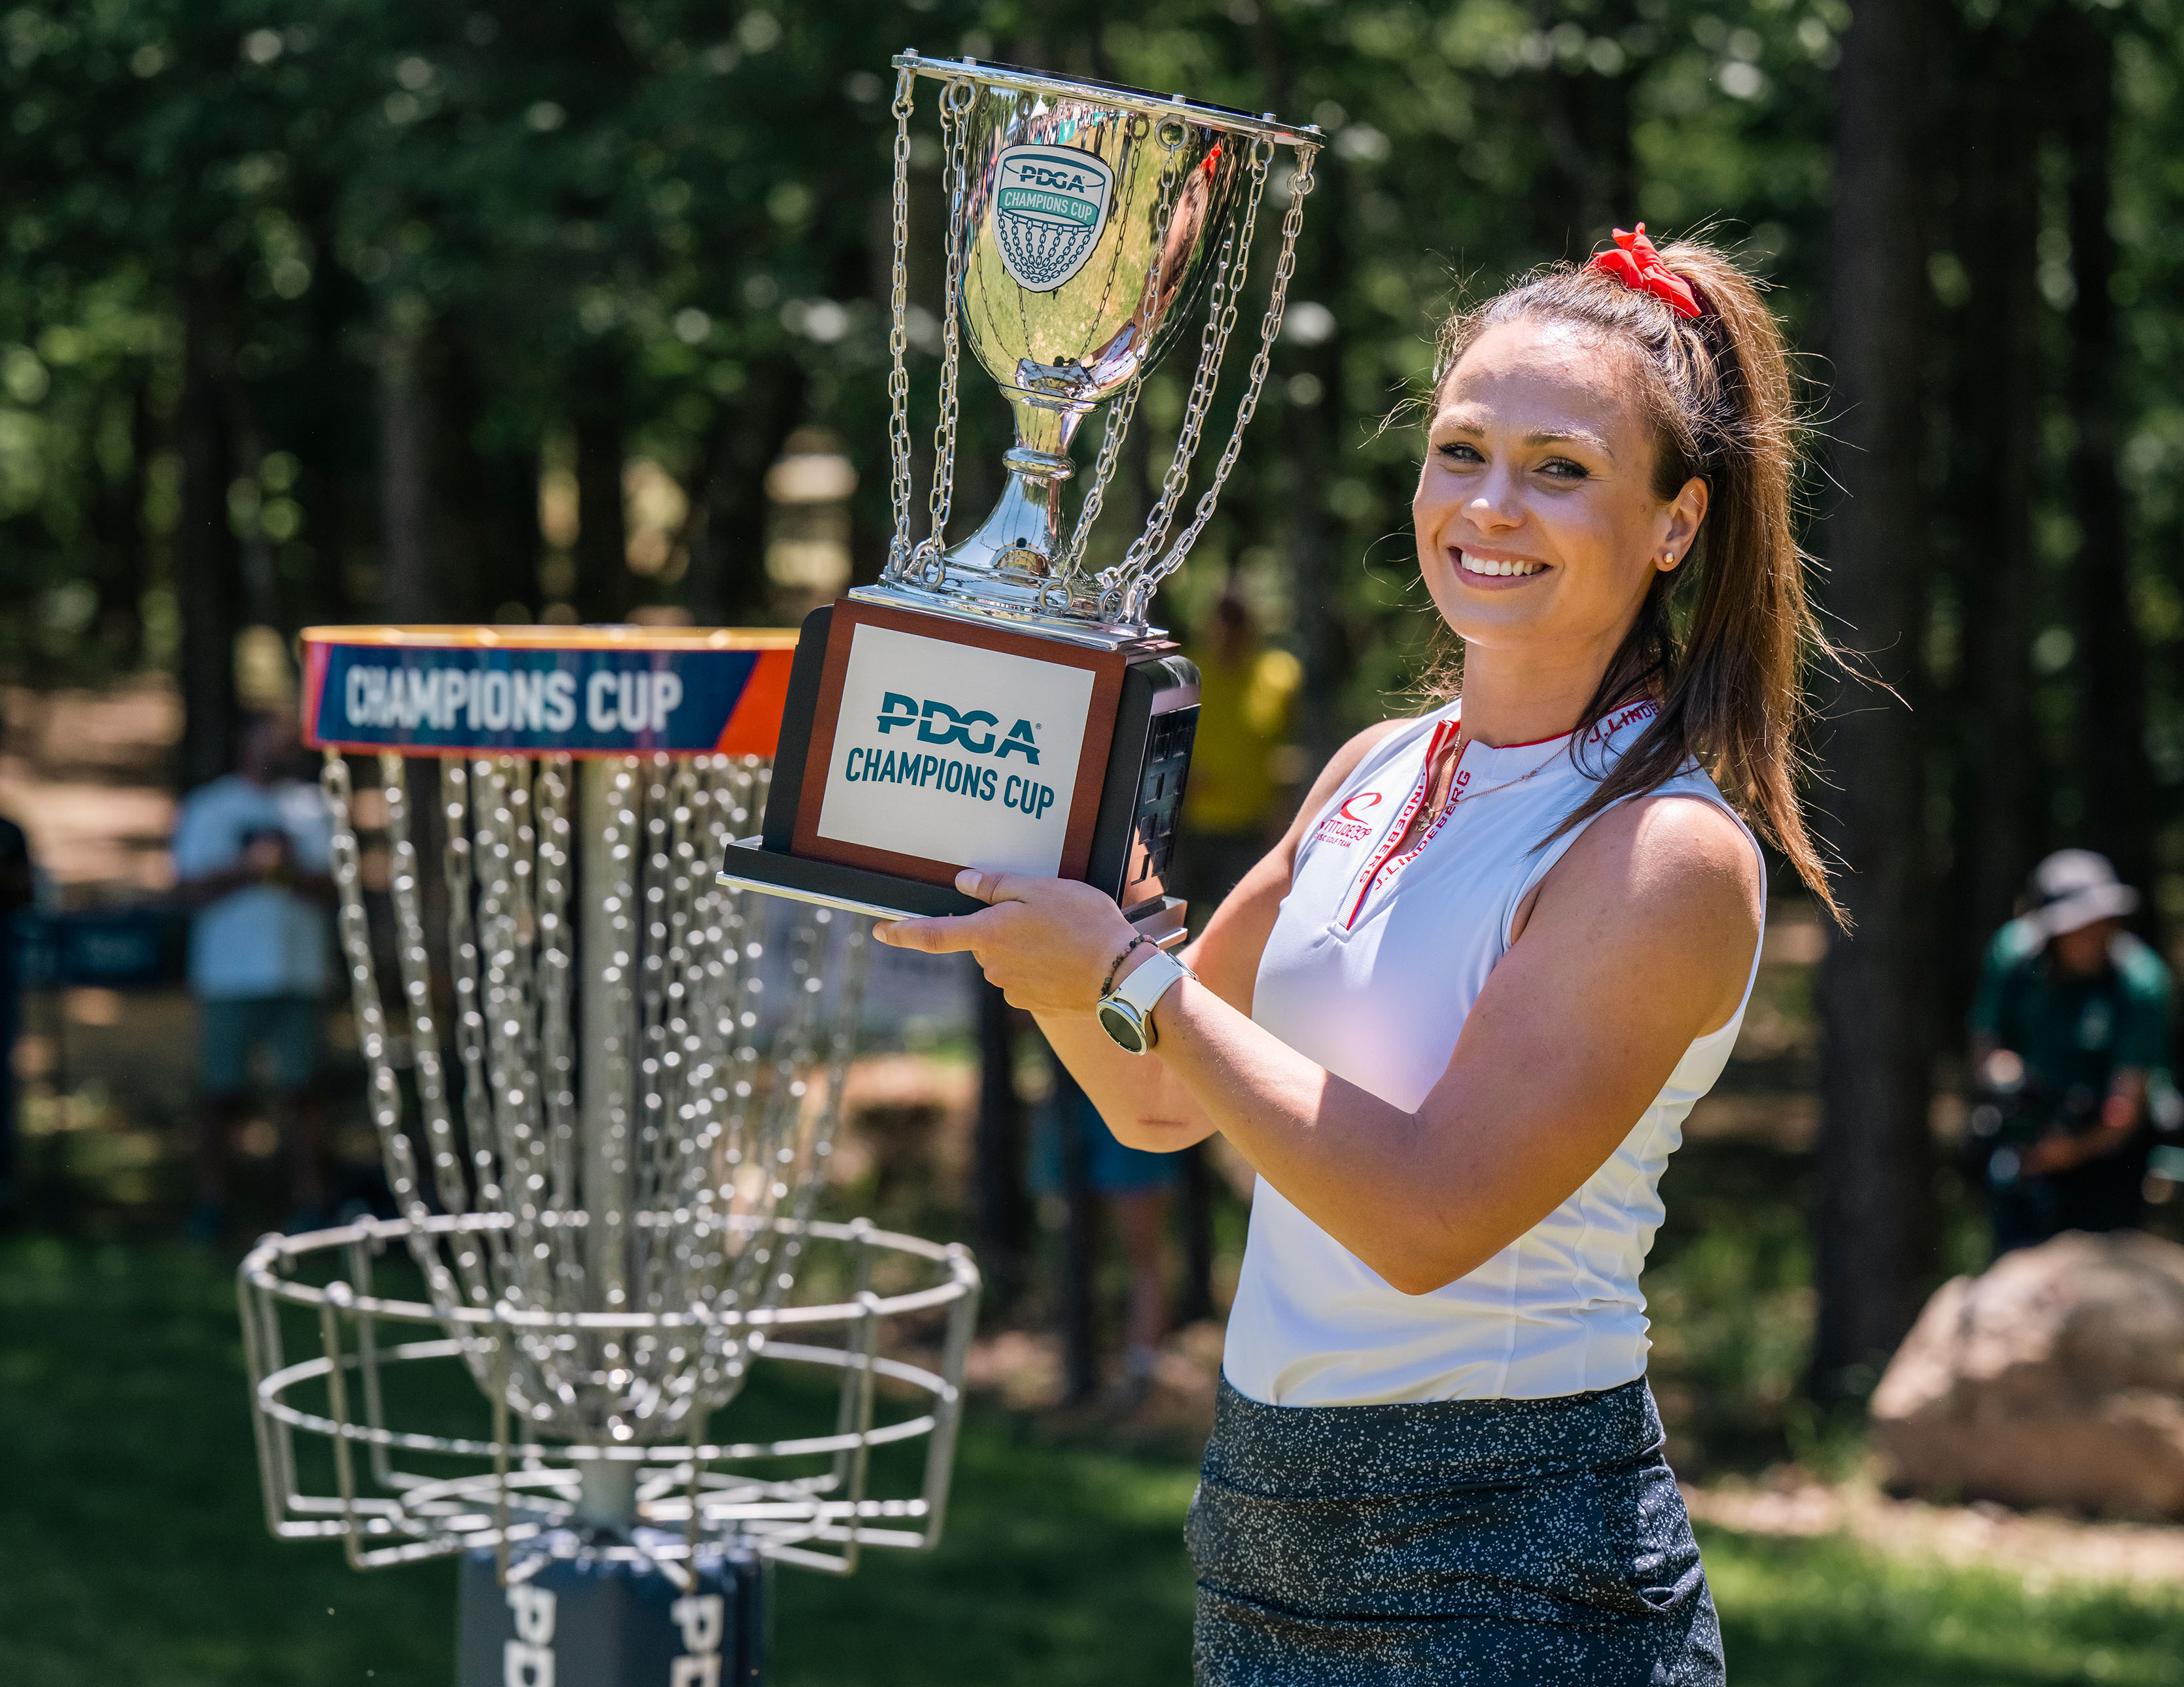 Tattar Takes the Cup | Professional Disc Golf Association